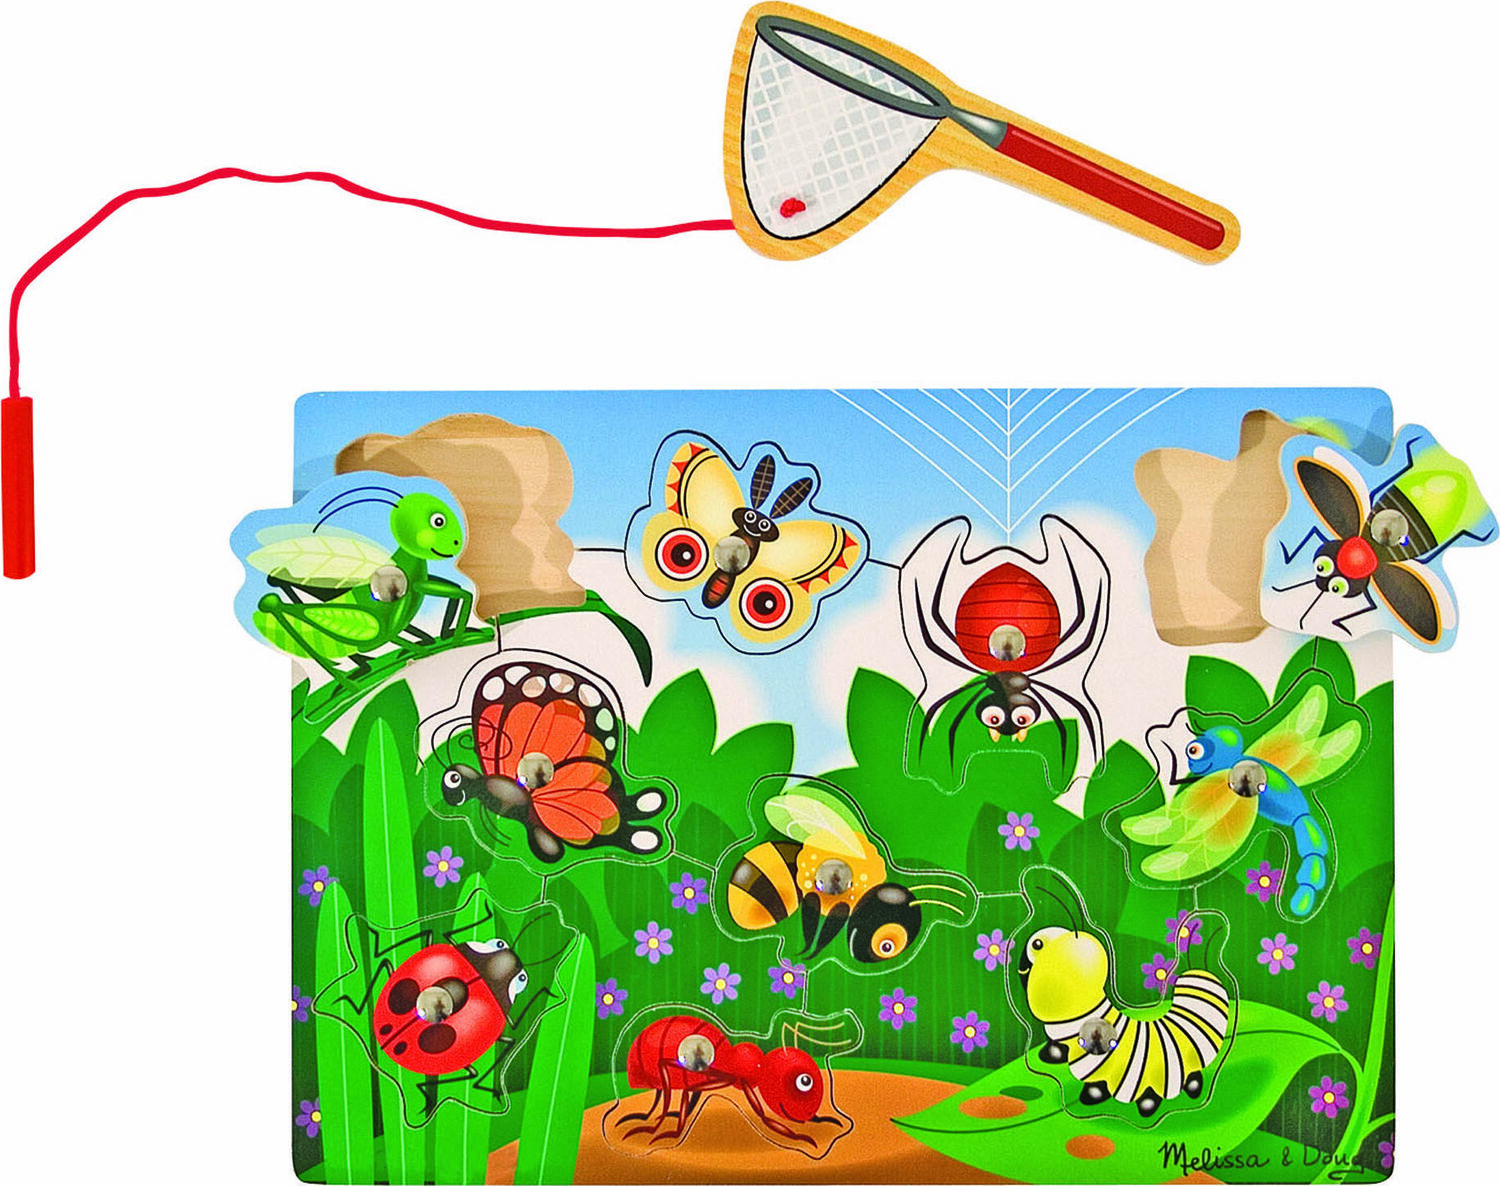 Melissa & Doug Md3779 Magnetic Bug Catching Game for sale online 